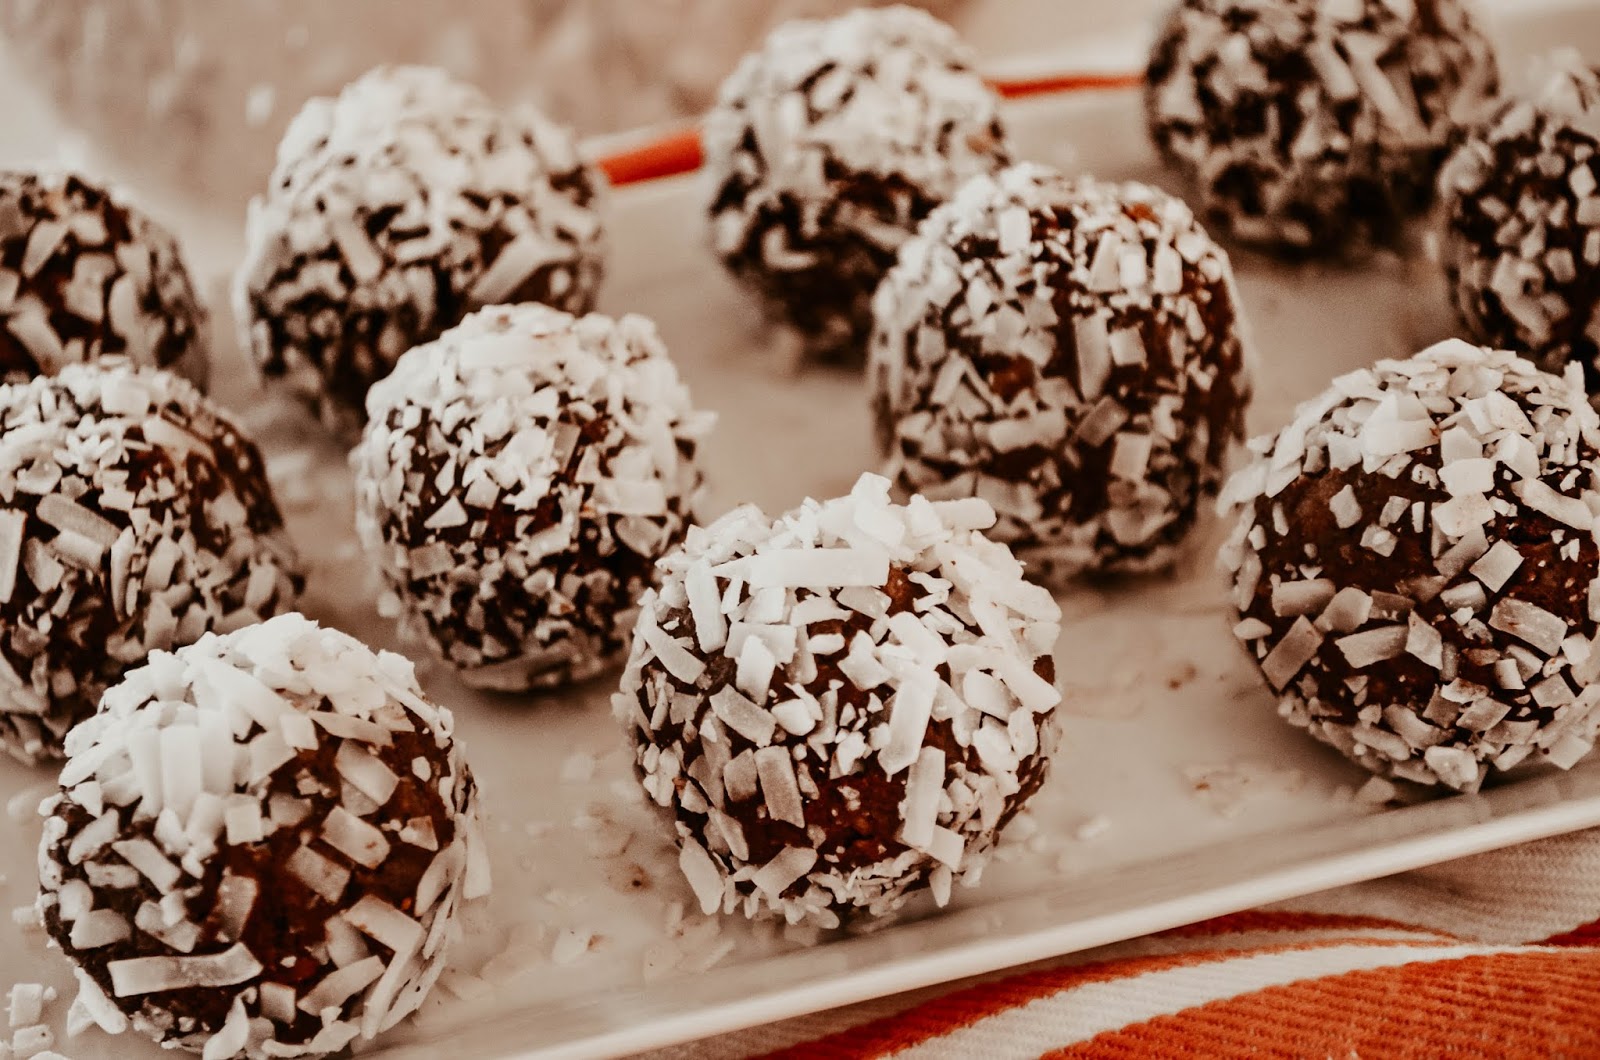 healthy-unsweetened-non-sugary-mood-boosting-chocolate-date-truffles-dessert